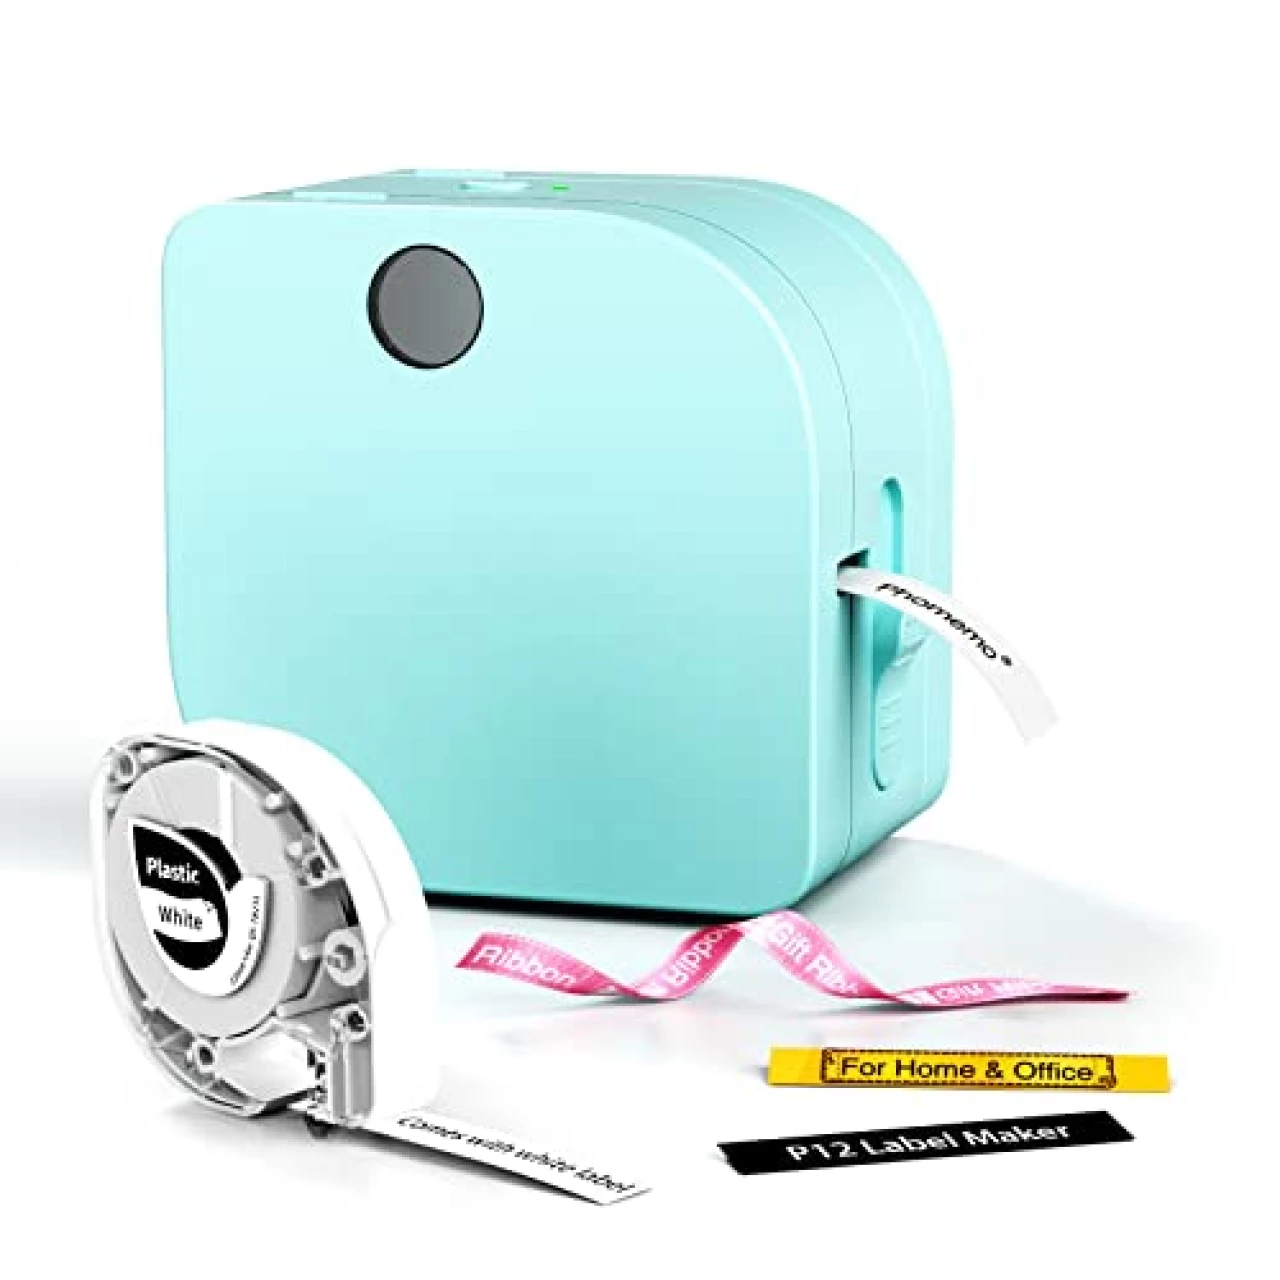 Phomemo Label Makers - Label Maker Machine with Tape P12, Mini Label Printer with Font, Sticker Maker for Home Office Organization, Portable Bluetooth Label Printer Support Color Printing, with Labels